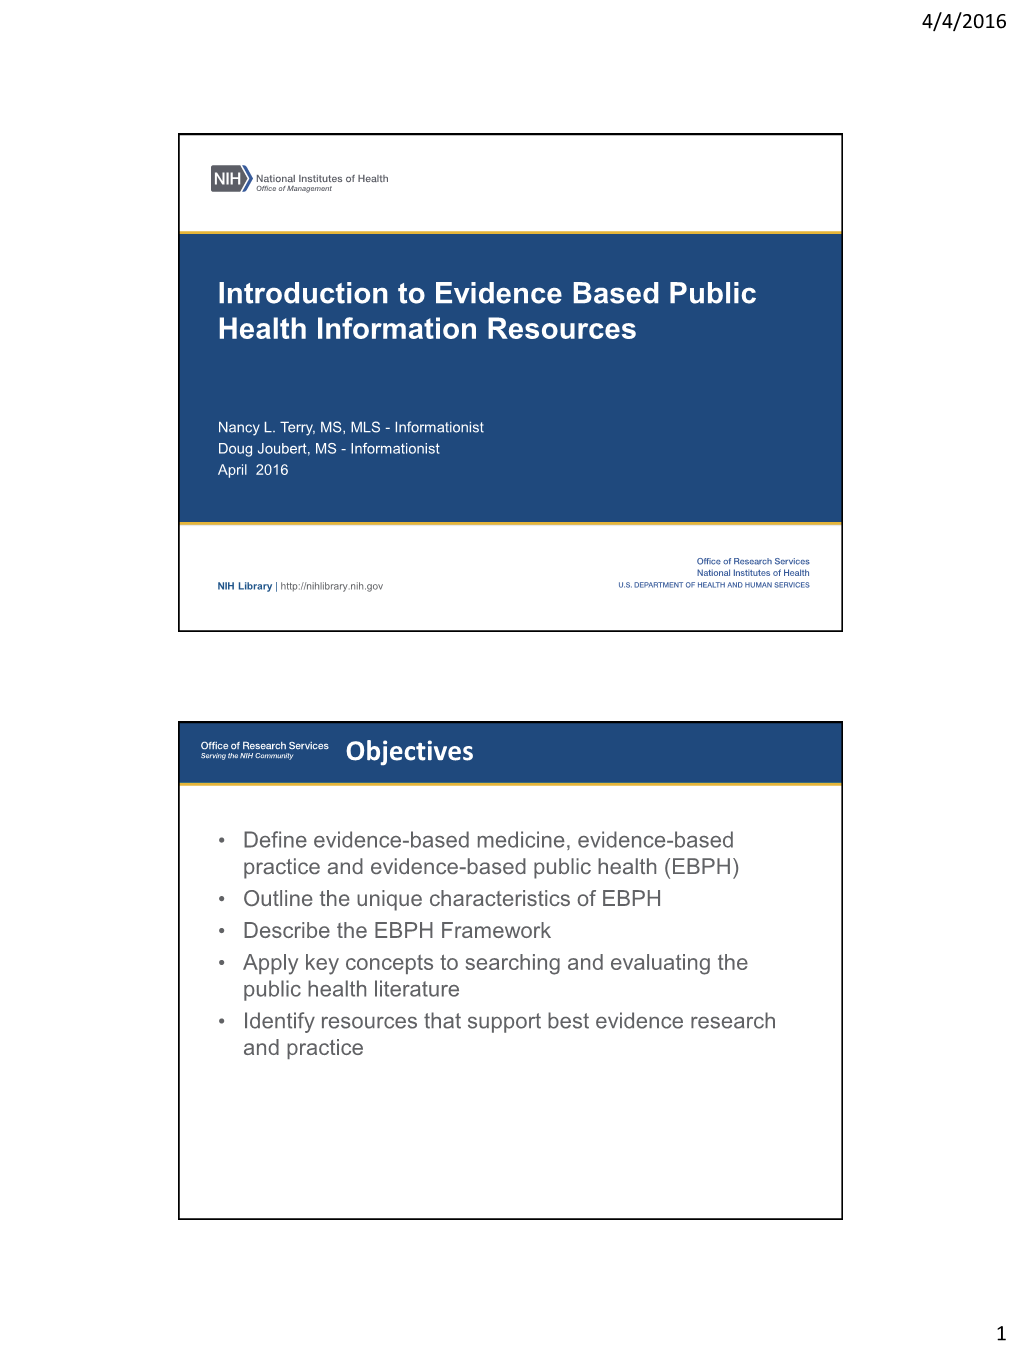 Introduction to Evidence Based Public Health Information Resources